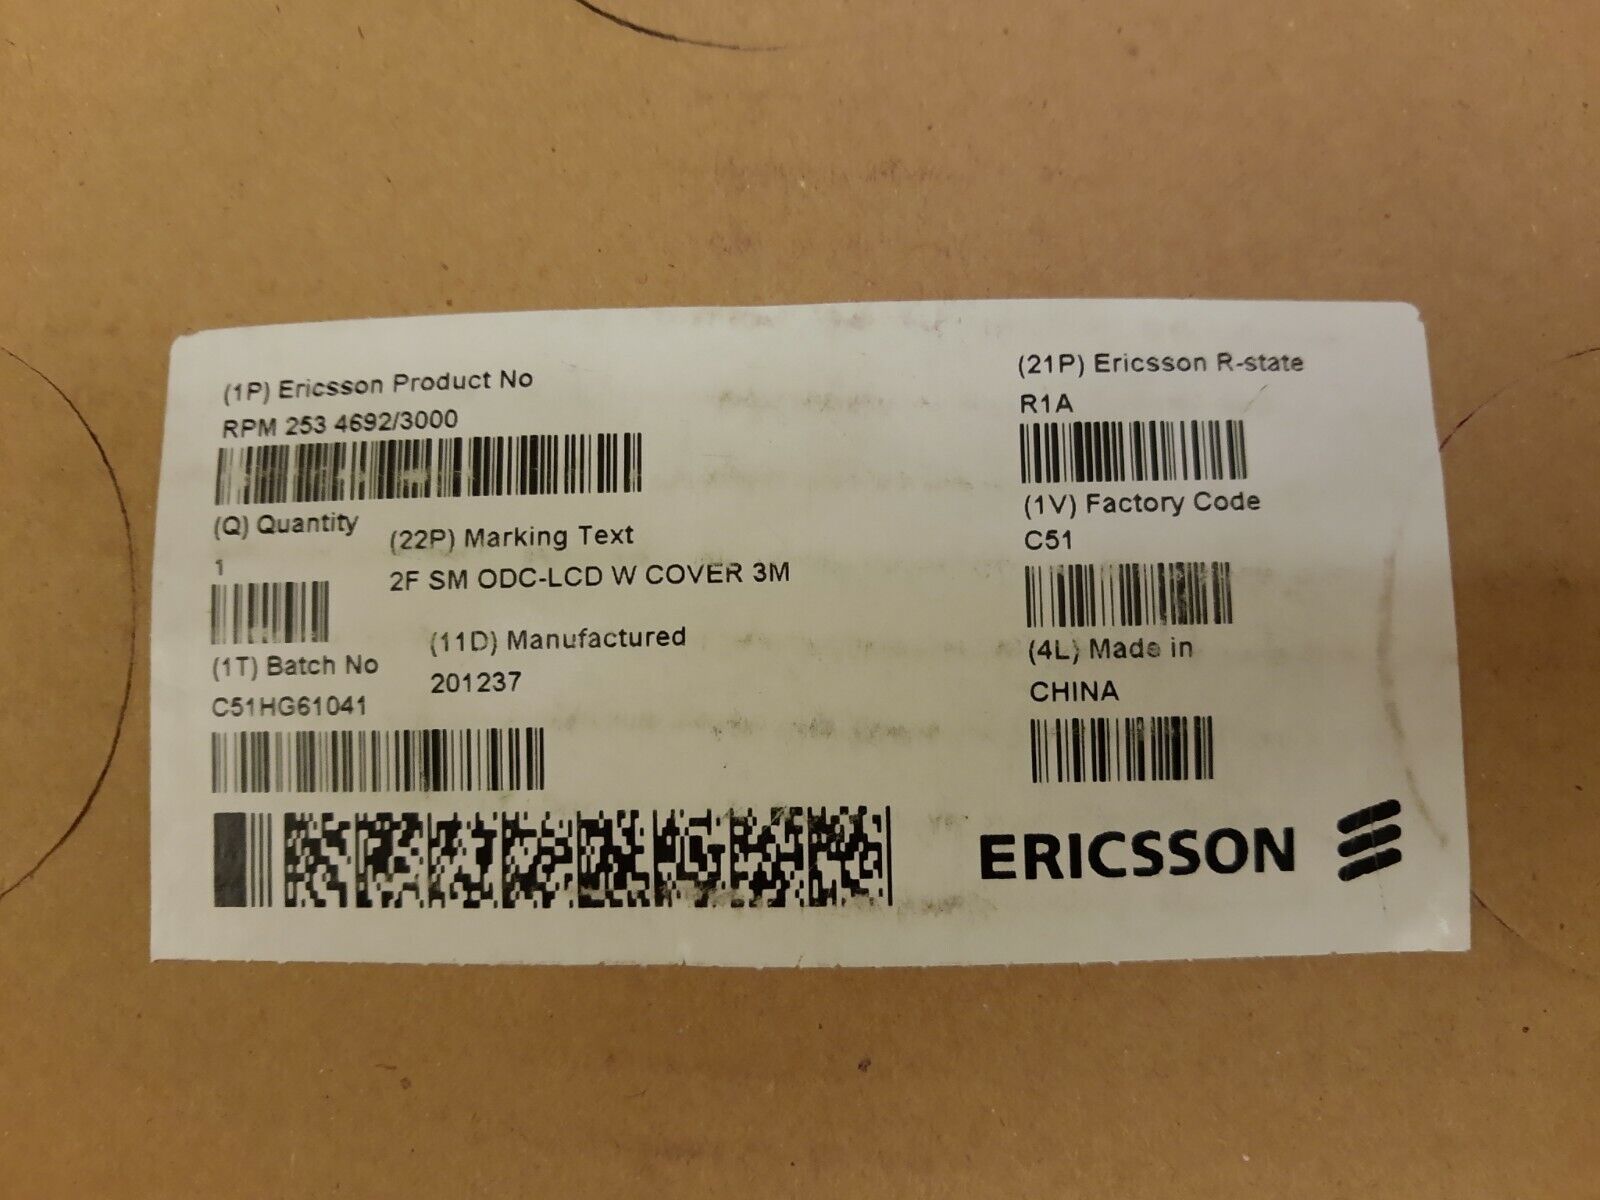 ERICSSON RPM 253 4692/3000 Fiber Optic Cable 2F SM ODC-LCD W Cover 3M (3 meters)